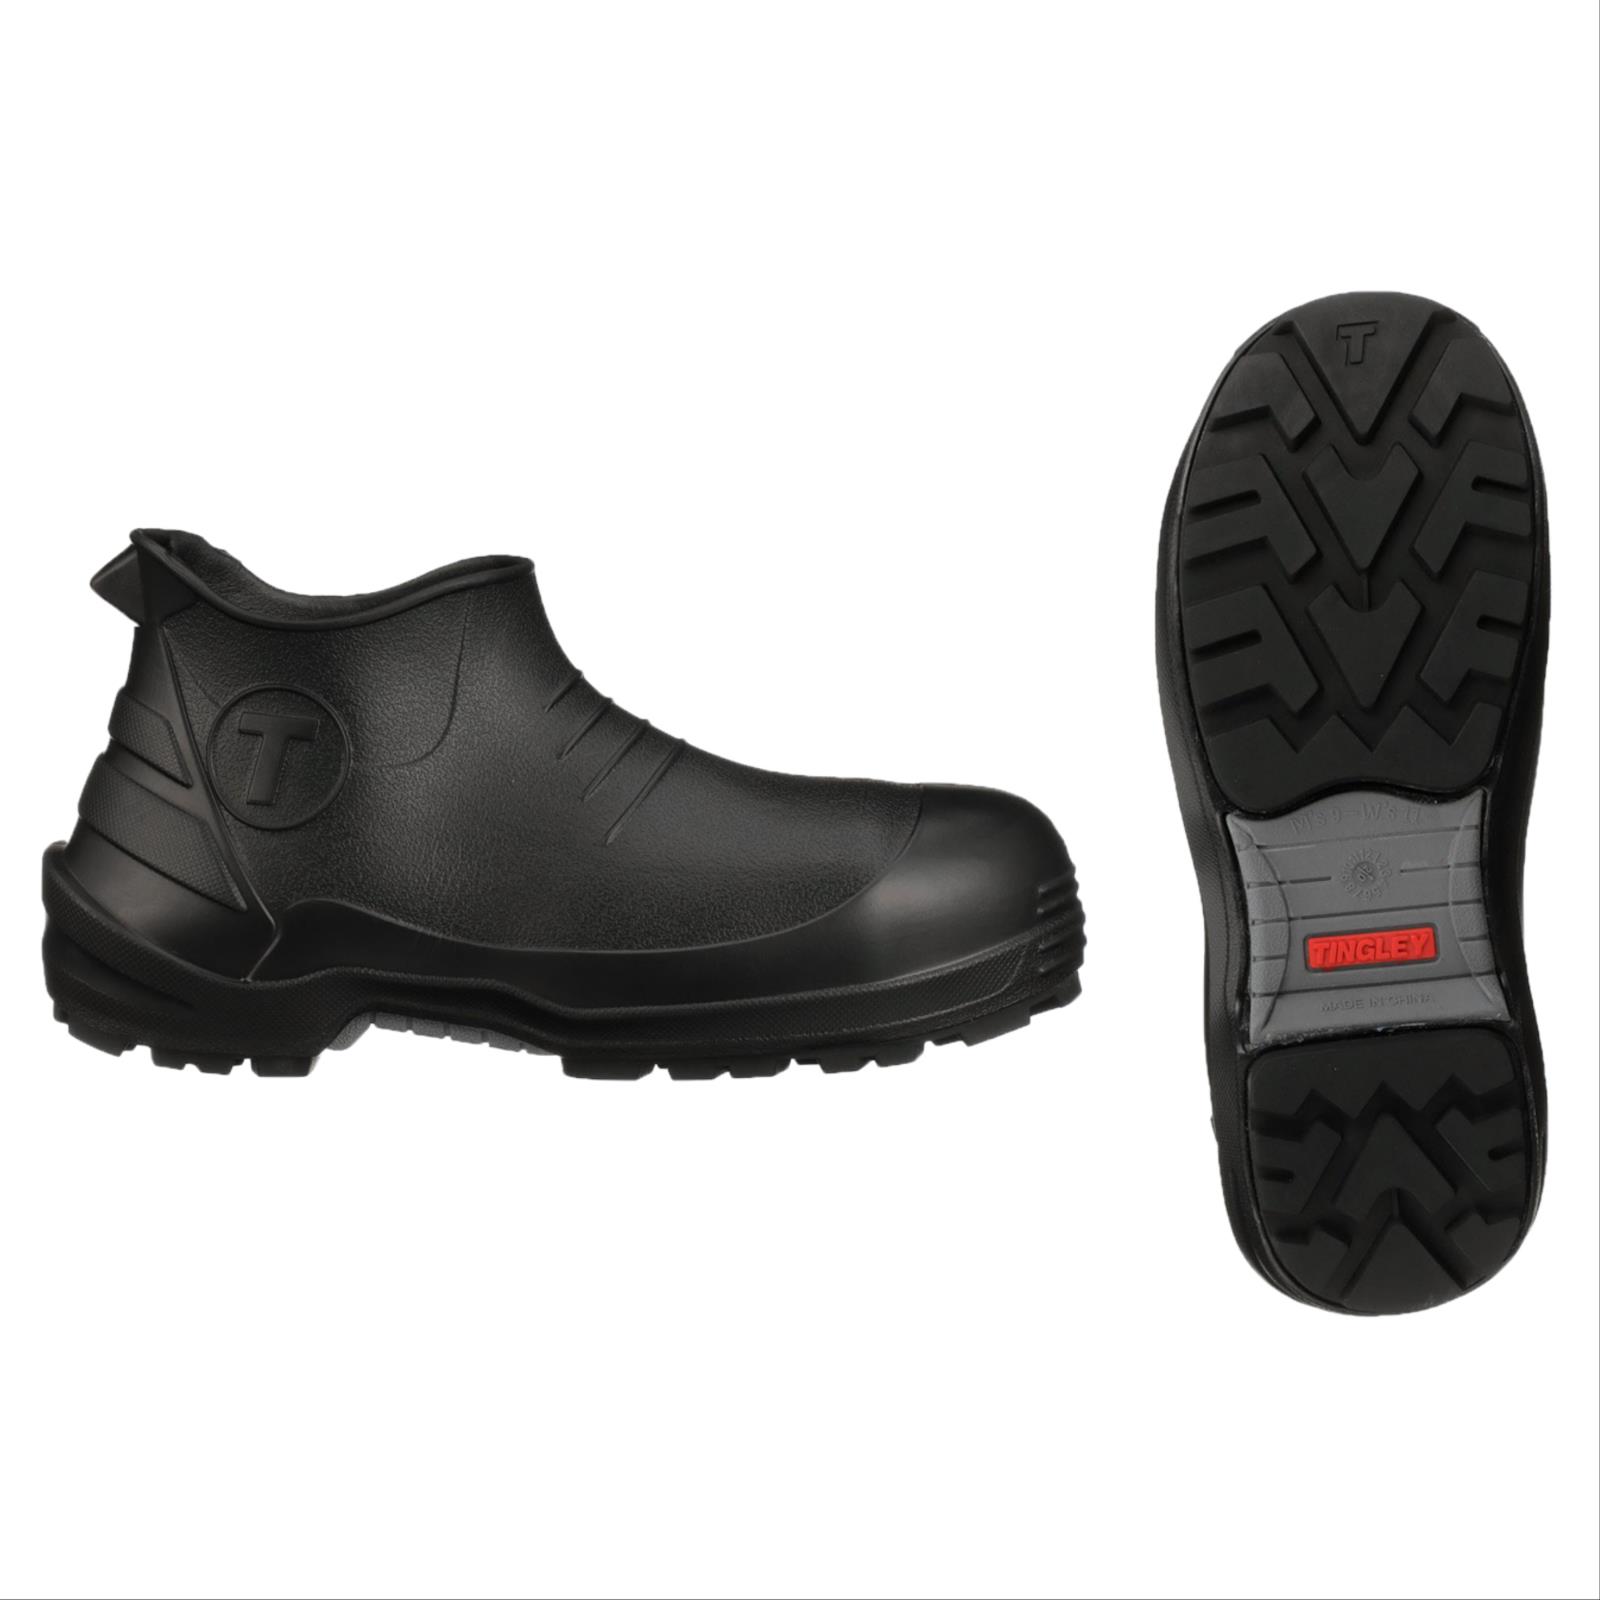 Flite® Safety Toe Work Shoes